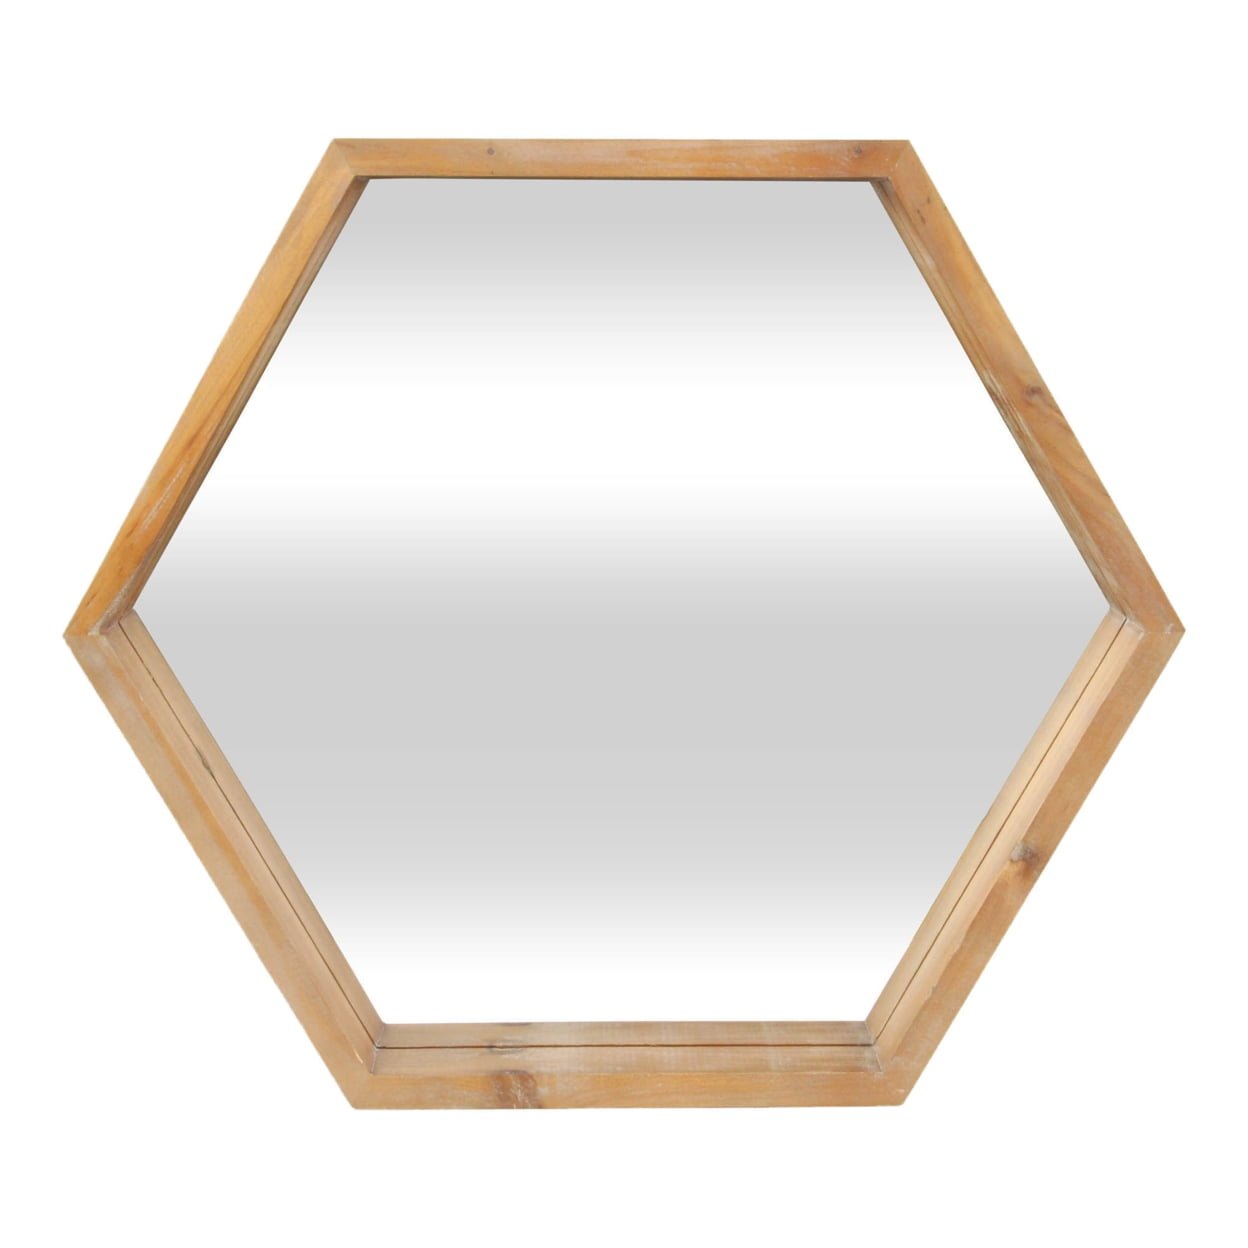 Picture of Cheungs 4577 Hexagonal Wooden Wall Mirror